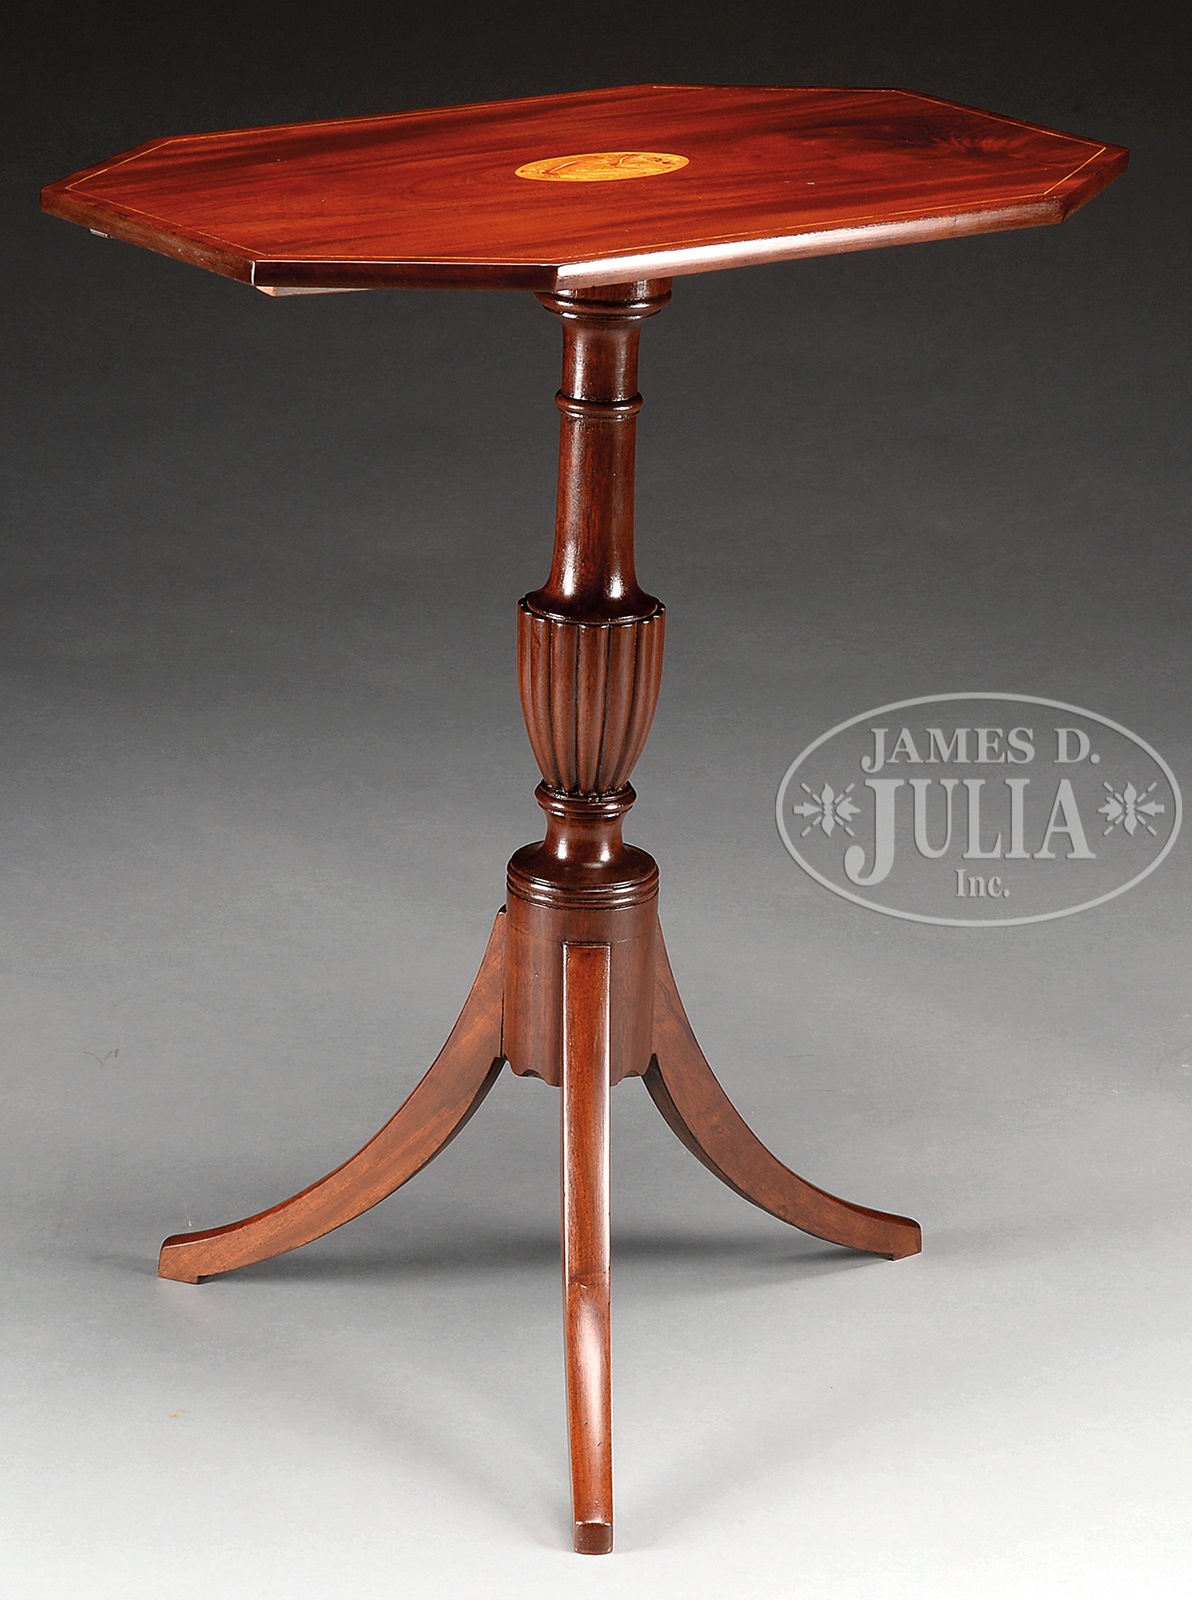 FINE FEDERAL INLAID MAHOGANY CANDLESTAND. 1790-1810, New York. Rectangular top with canted corners